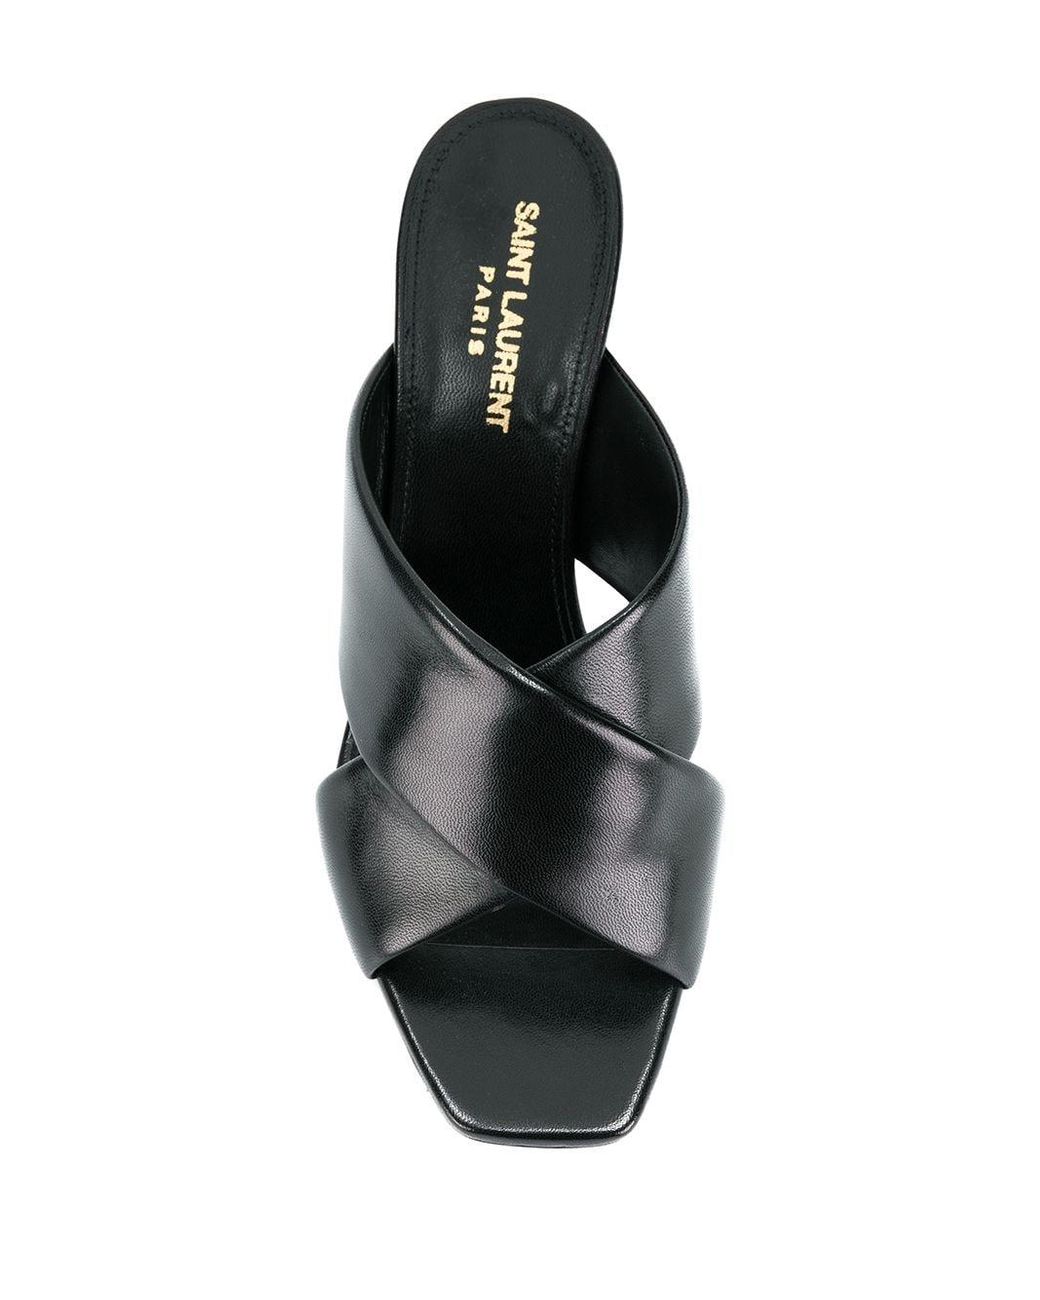 Saint Laurent Leather Loulou Mules in Black - Save 44% - Lyst